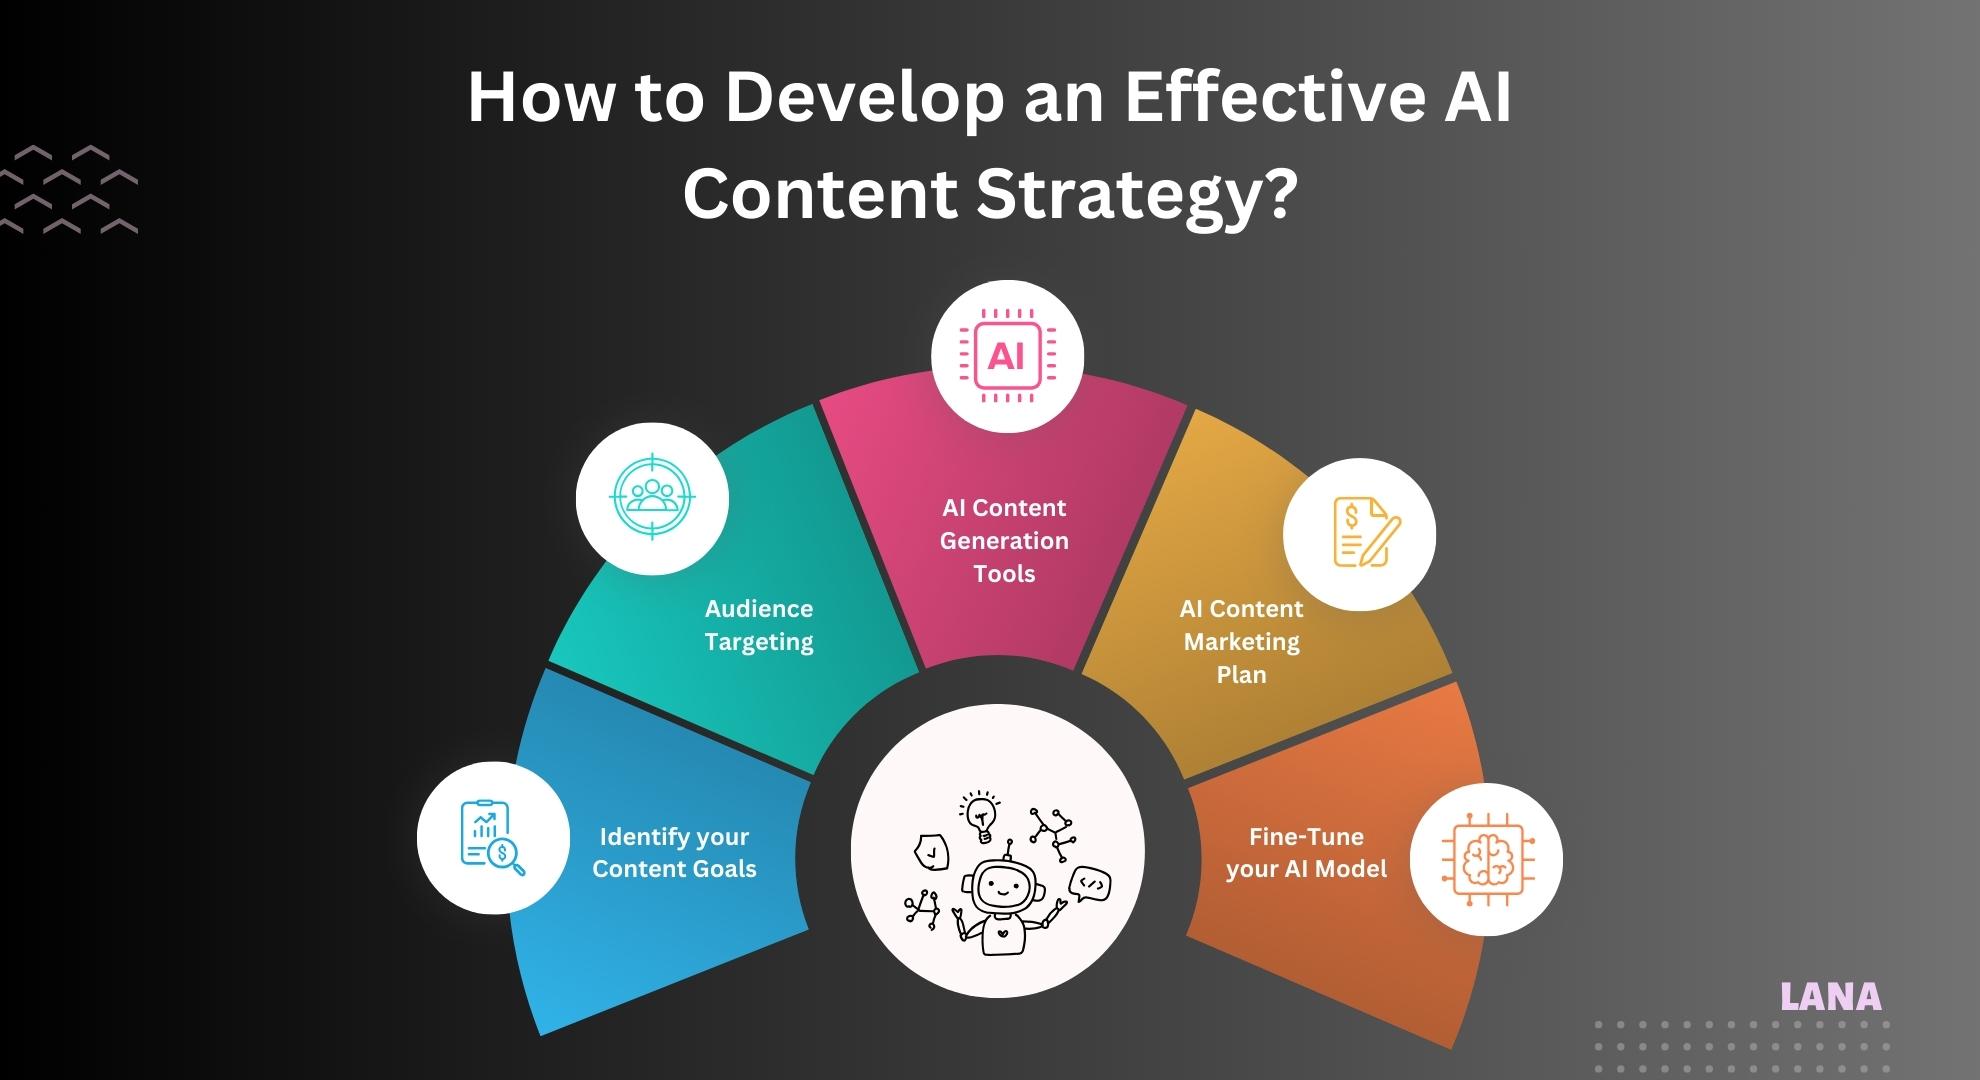 How to Develop an Effective AI Content Strategy